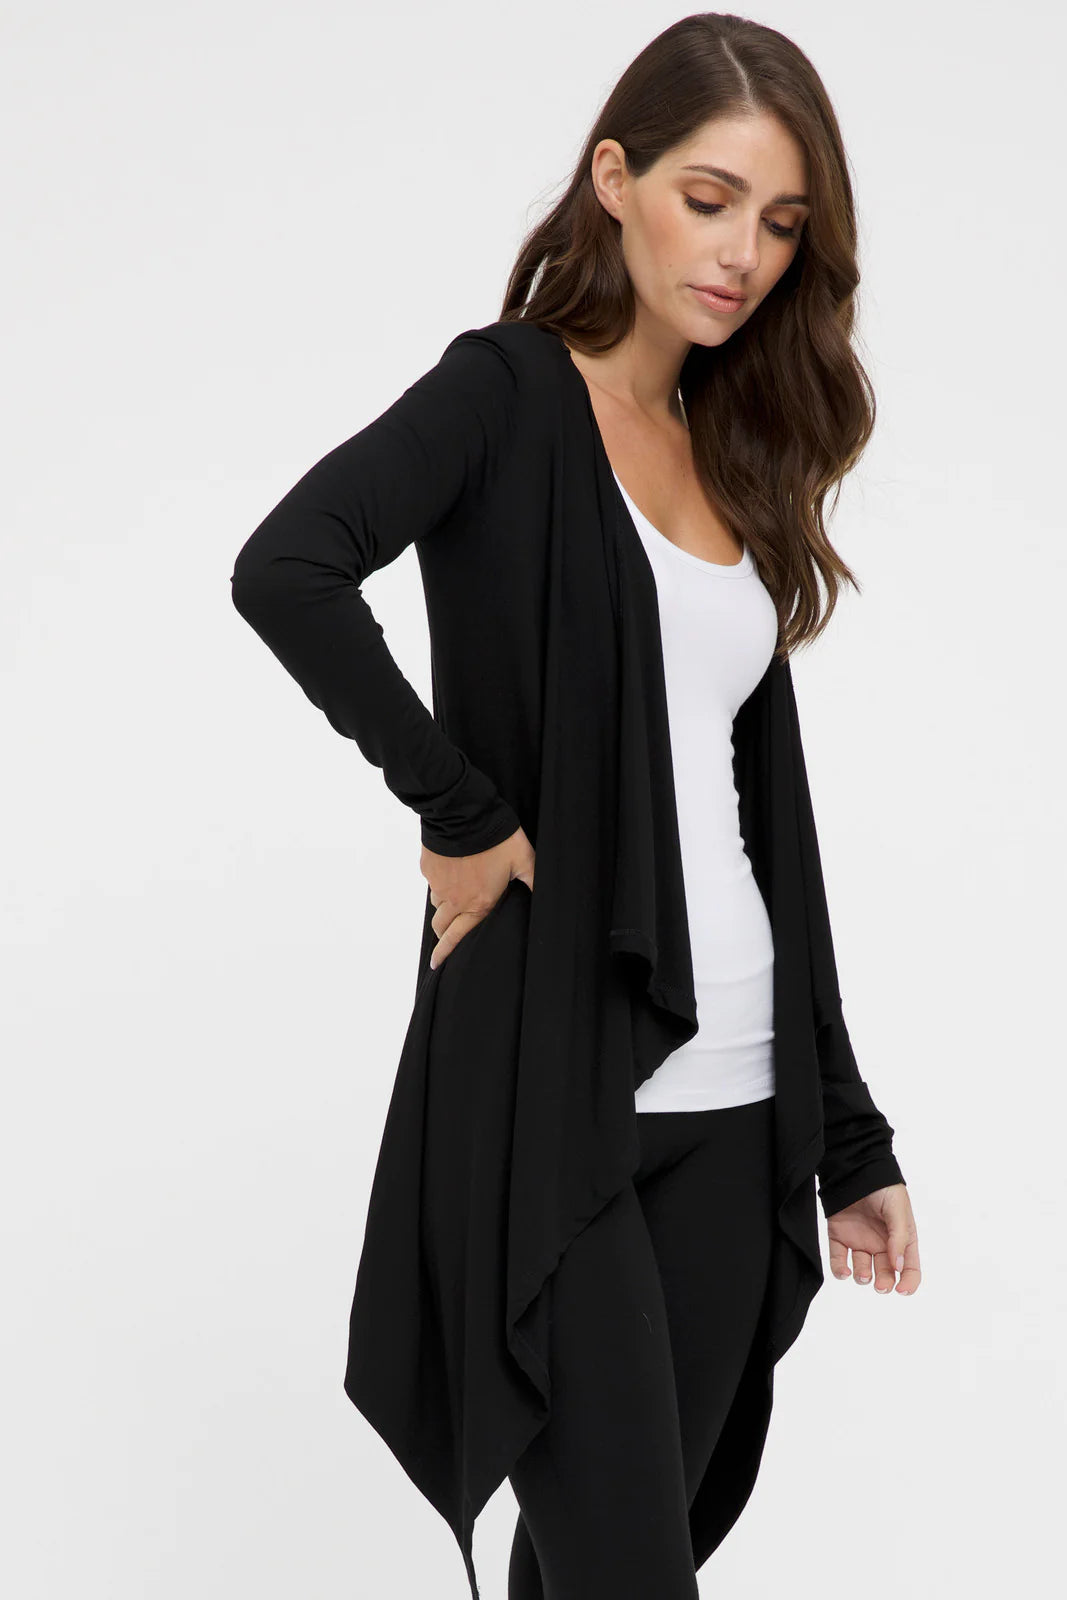 "Eco-friendly bamboo women's clothing: Black waterfall cardigan offers luxurious softness and style."